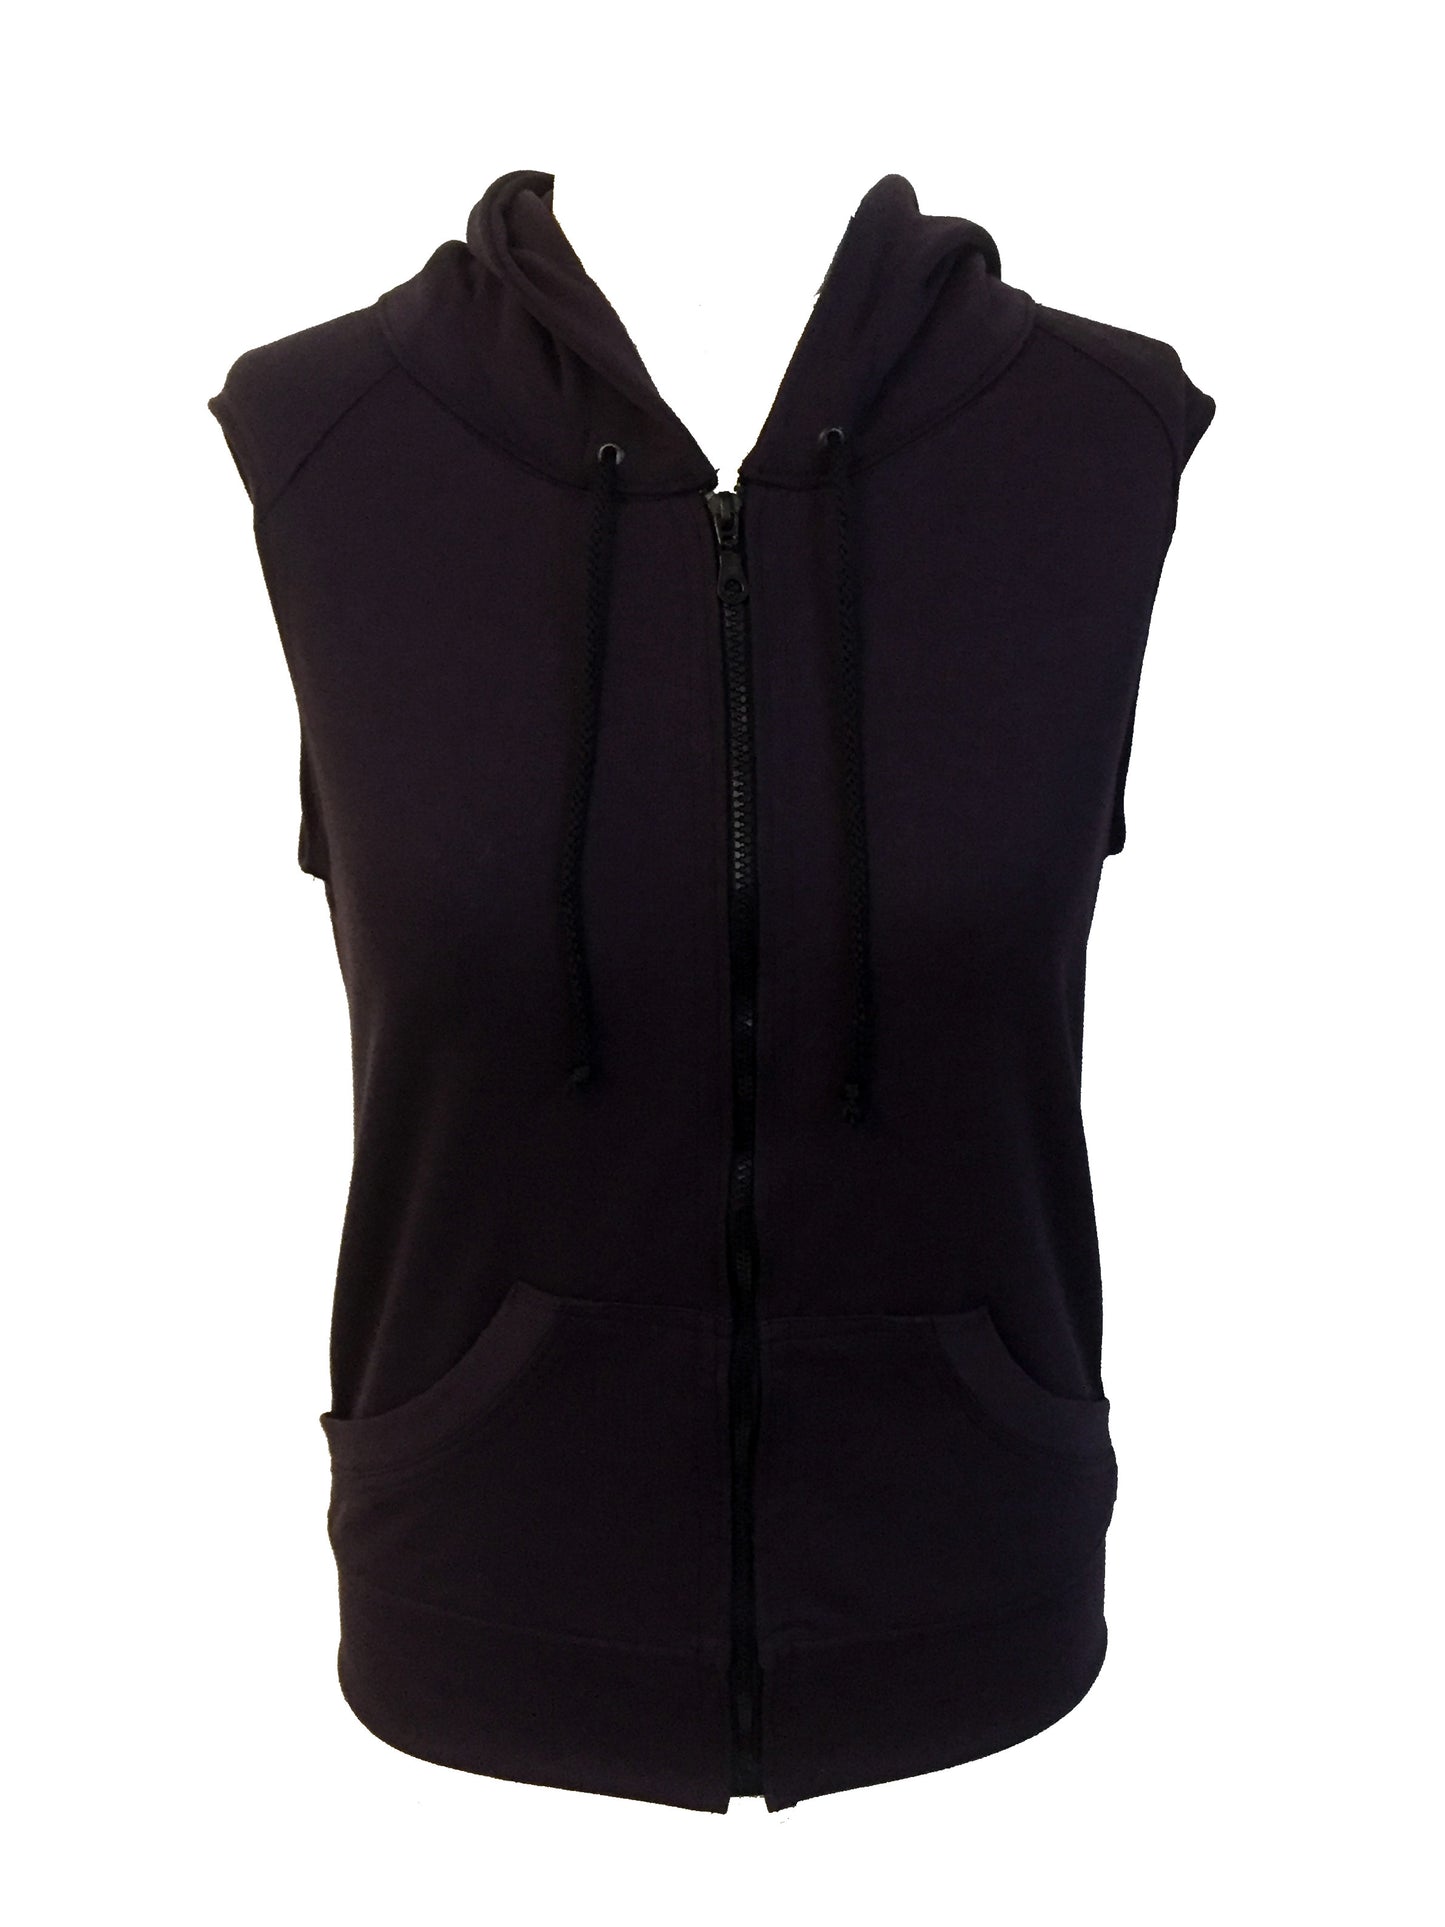 Just The Right 'Tude sleeveless zipper Hoodie in Eggplant